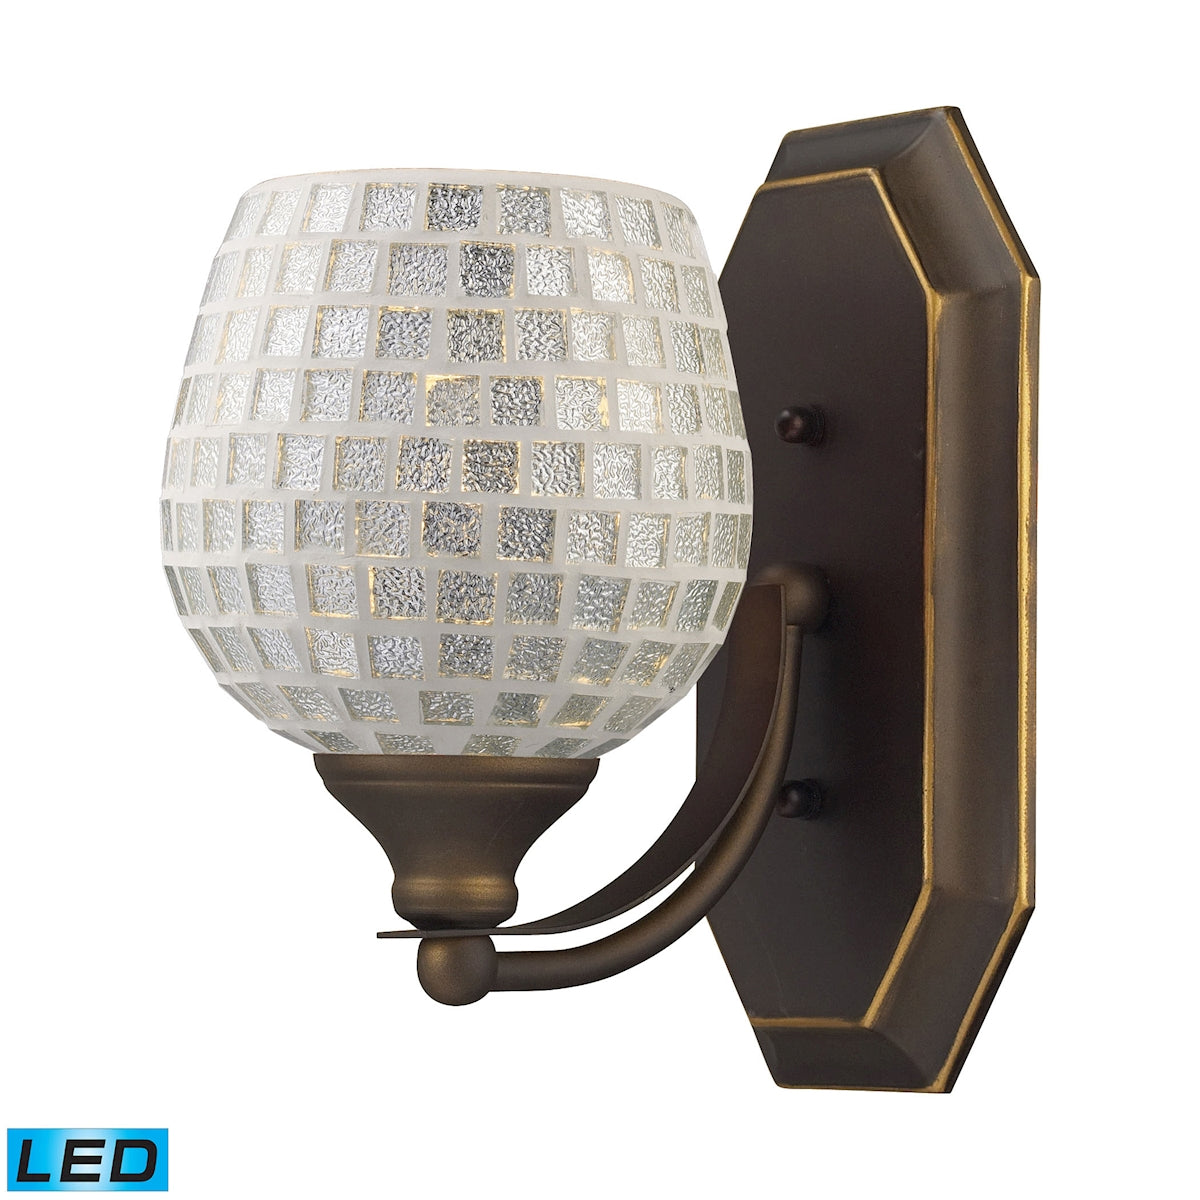 ELK Lighting 570-1B-SLV-LED Mix-N-Match Vanity 1-Light Wall Lamp in Aged Bronze with Silver Glass - Includes LED Bulb